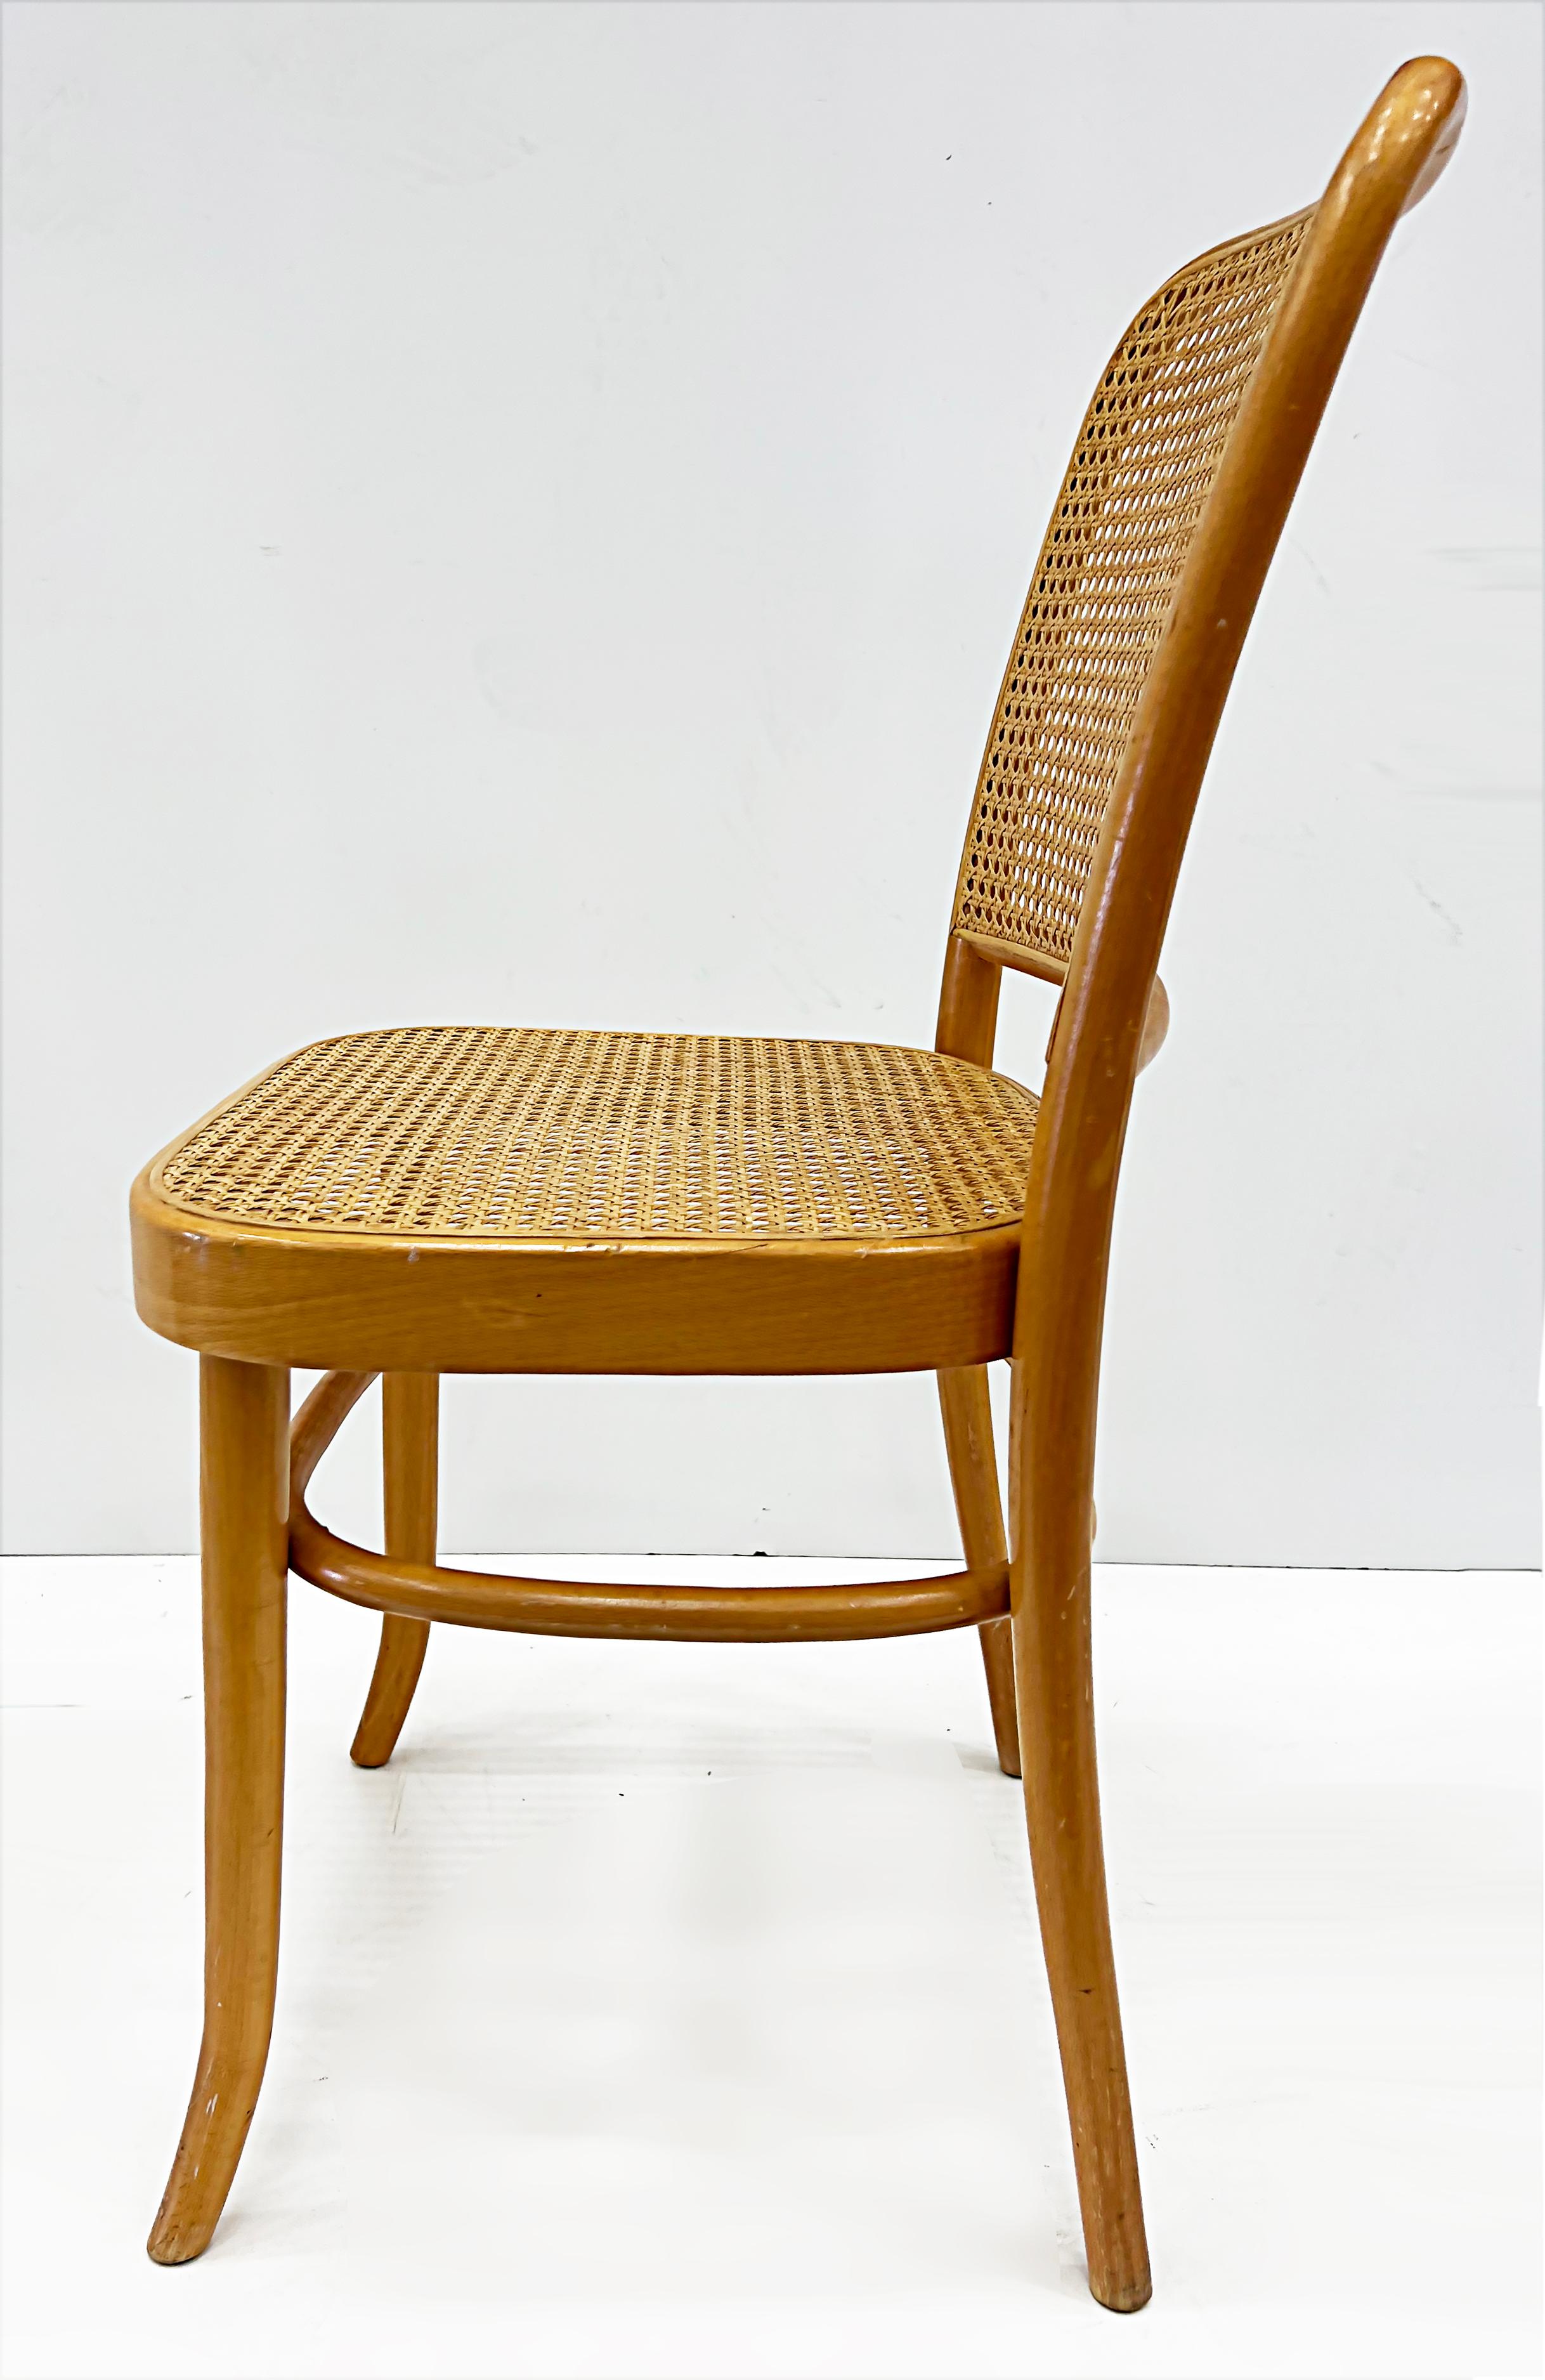 Salvatore Leone Vintage Bentwood Caned Chairs, Thonet Style For Sale 3